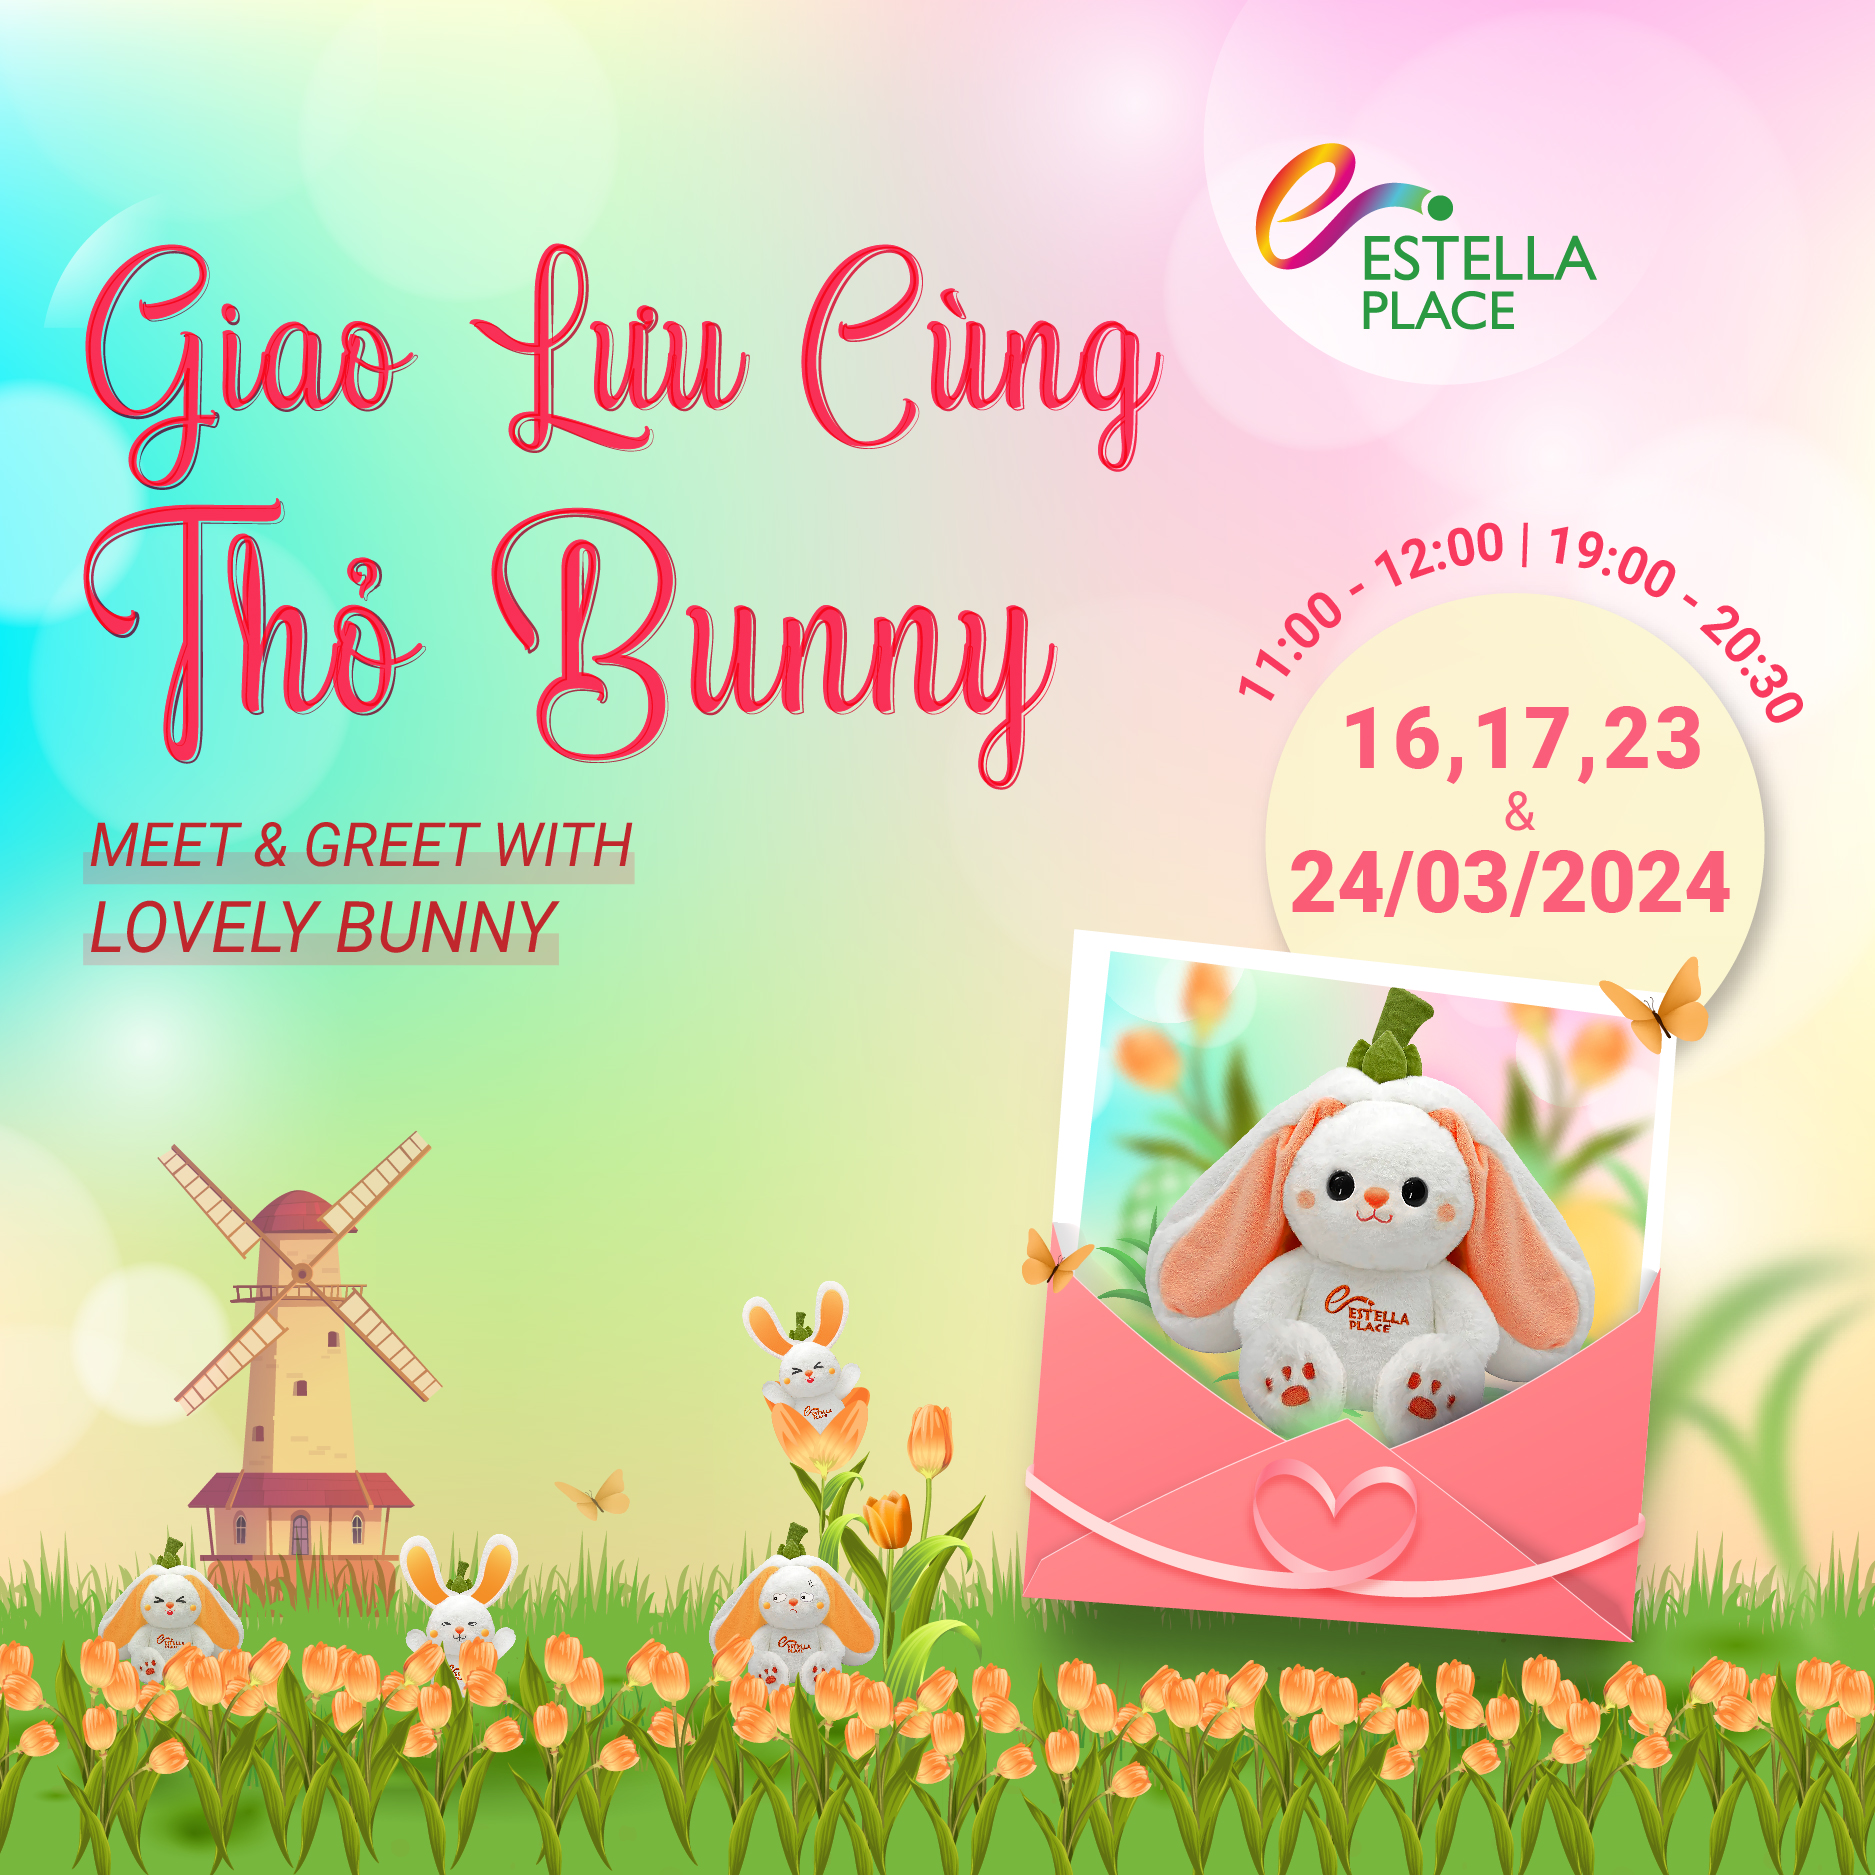 MEET & GREET WITH 🐰LOVELY BUNNY🐰